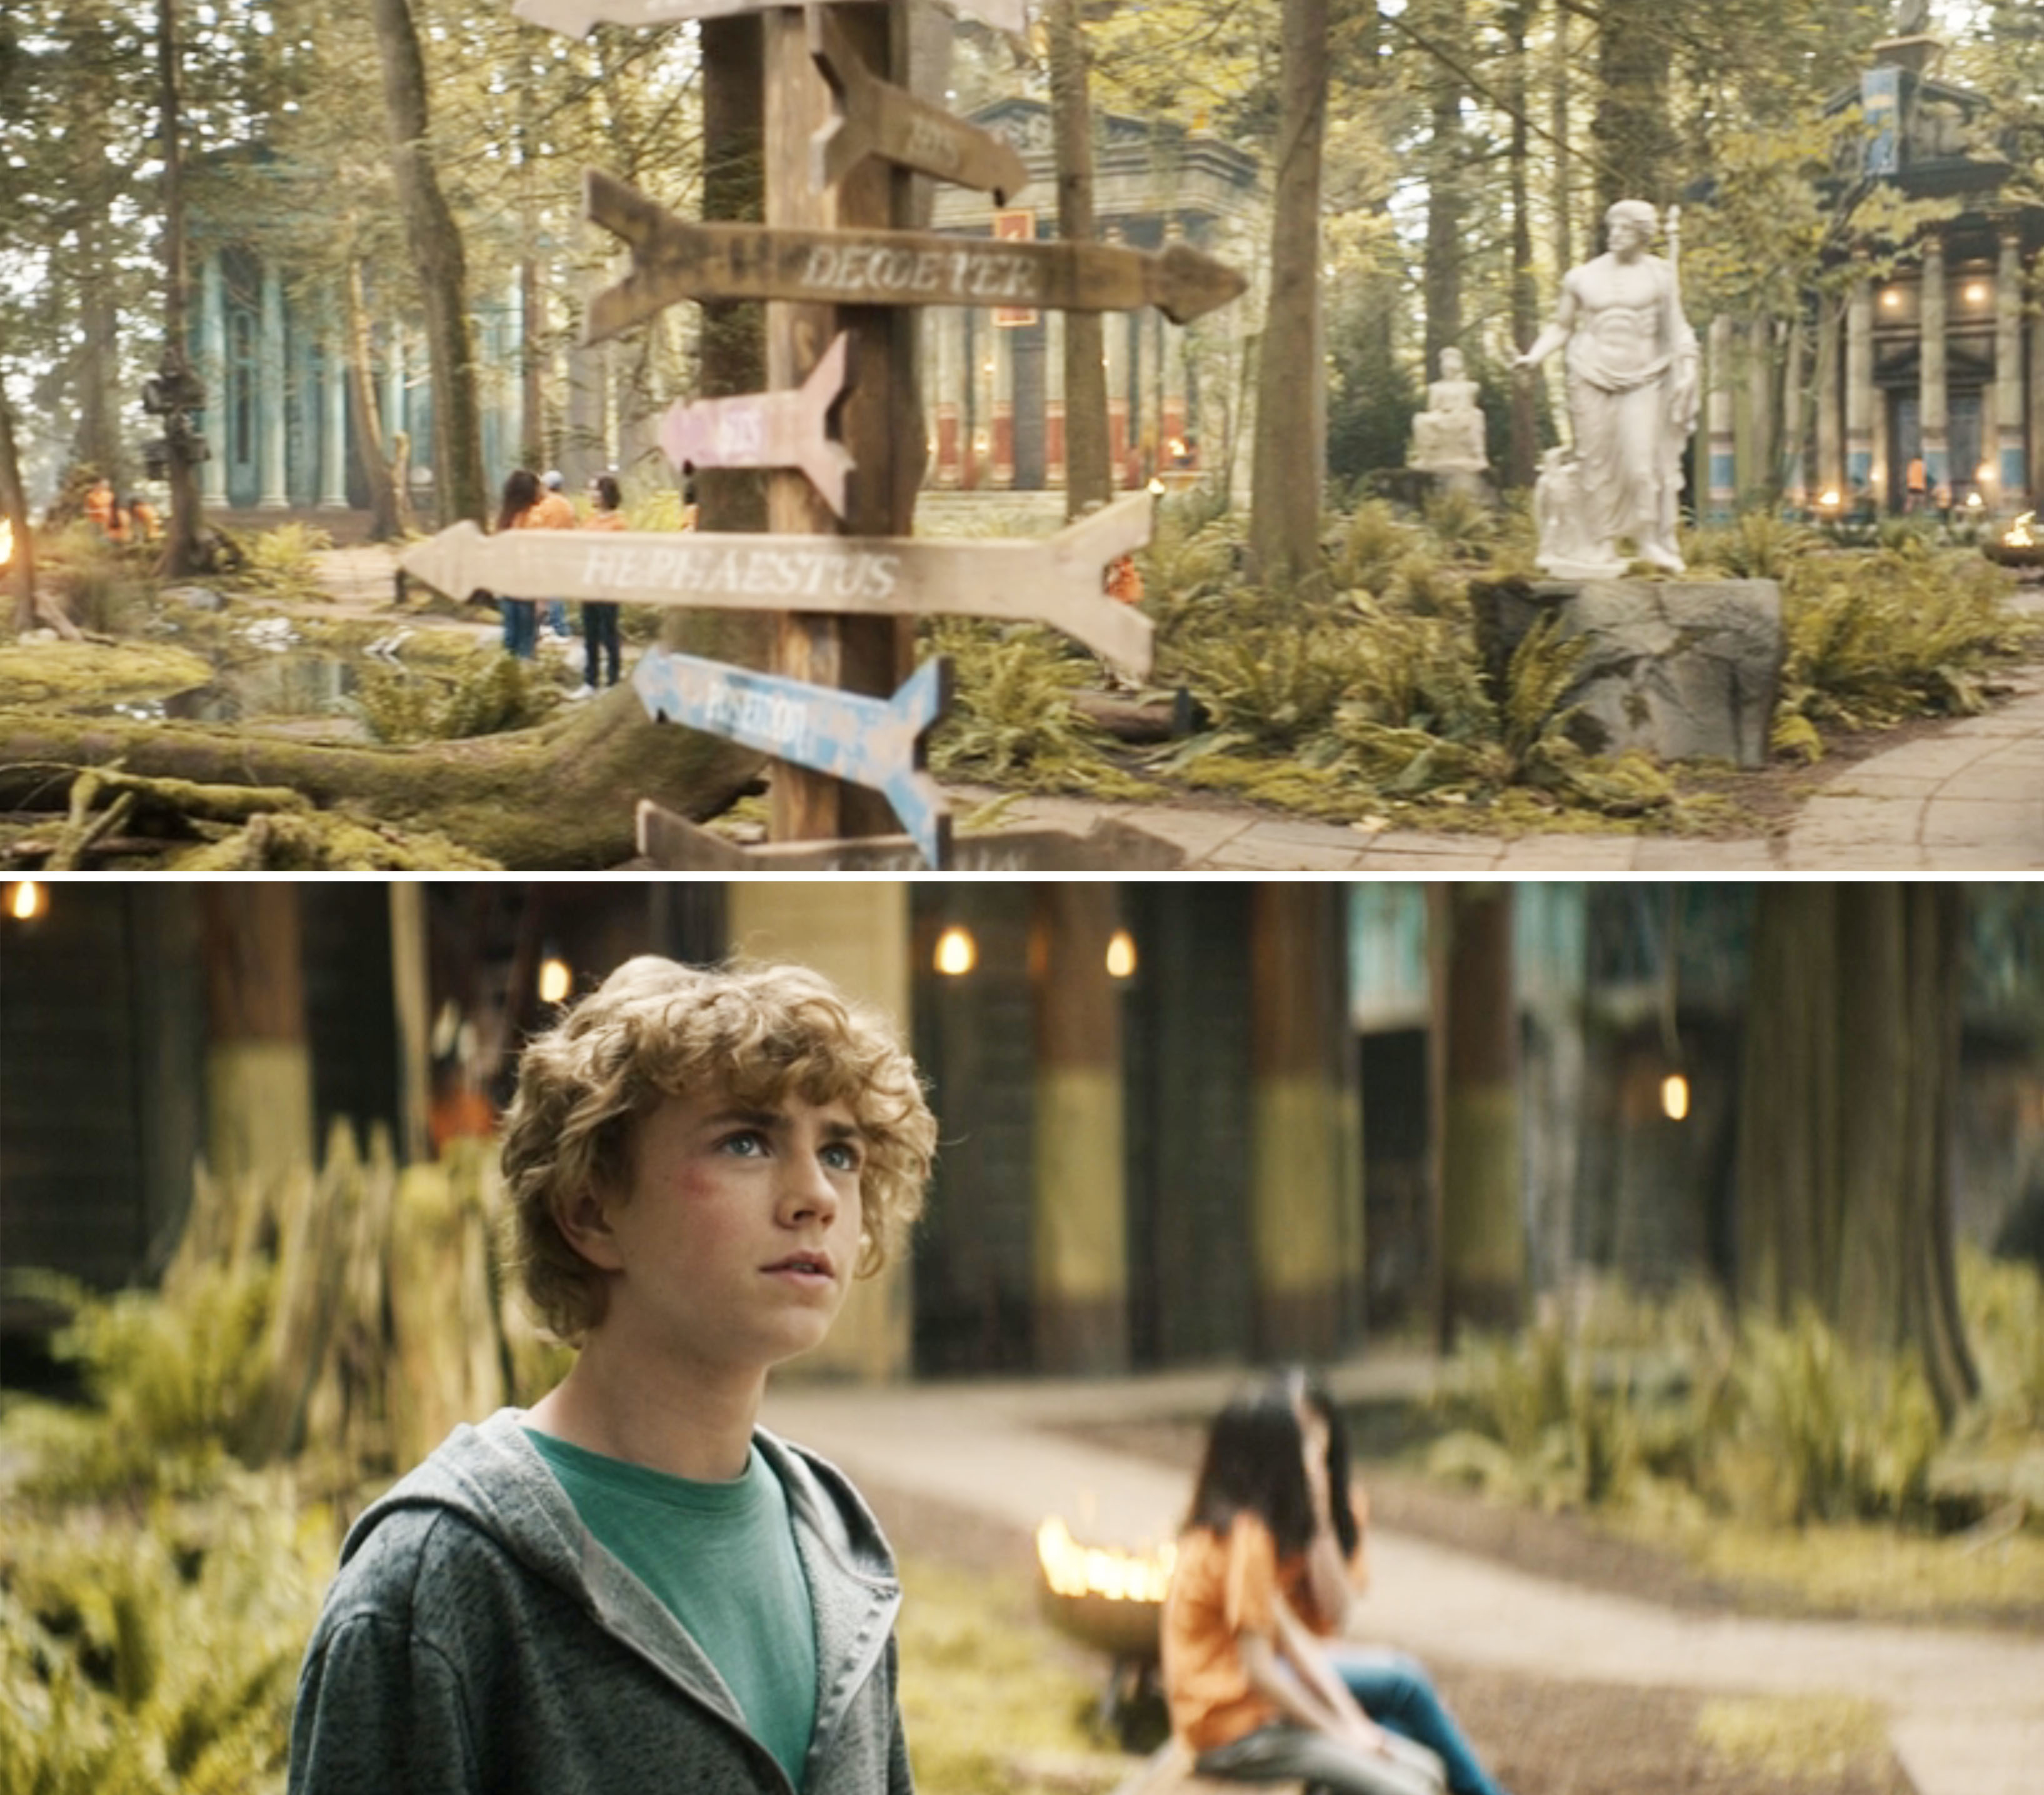 Screenshots from &quot;Percy Jackson and the Olympians&quot;